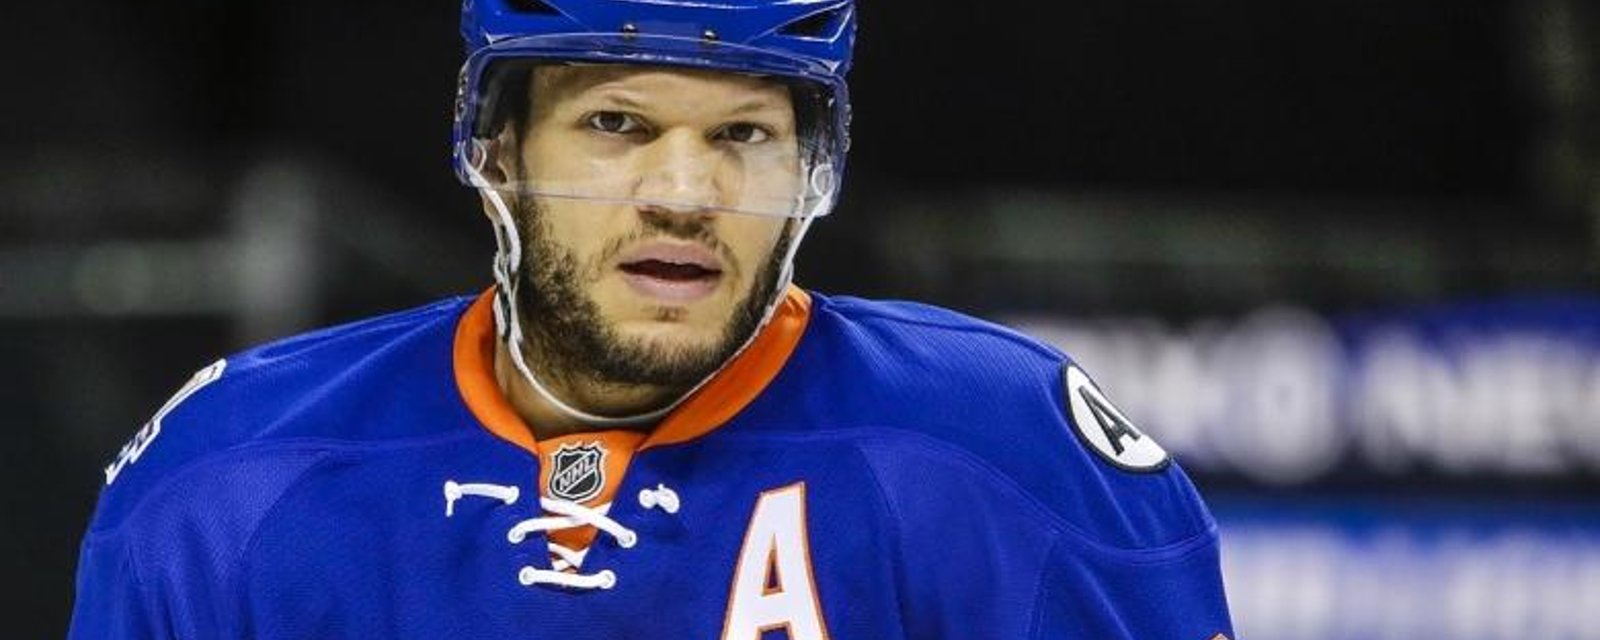 Breaking: Kyle Okposo gets massive $42 million deal with a new team.